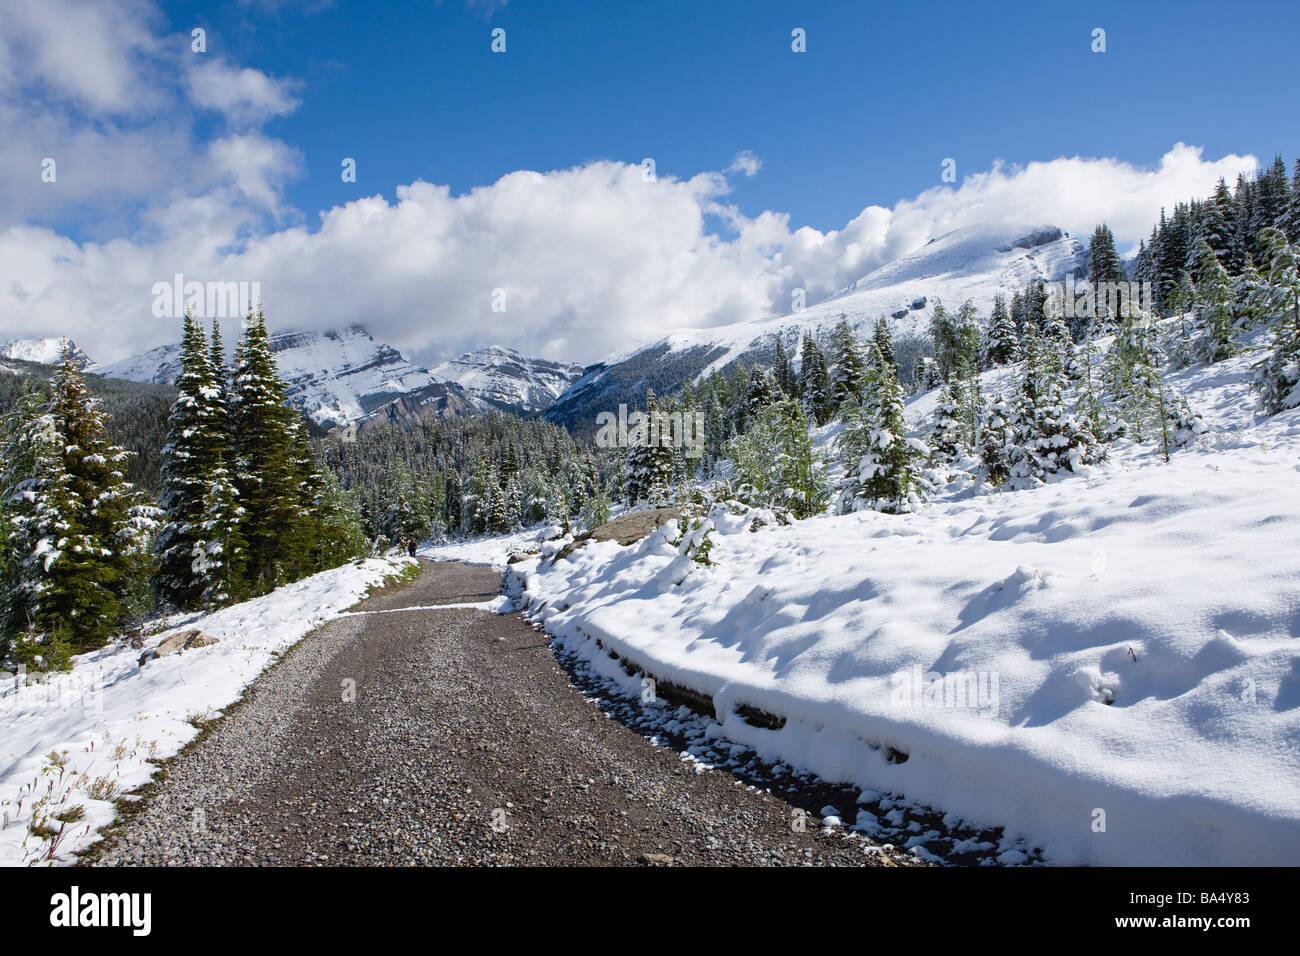 Road Heading From Snow-Capped Mountains Stock Photo